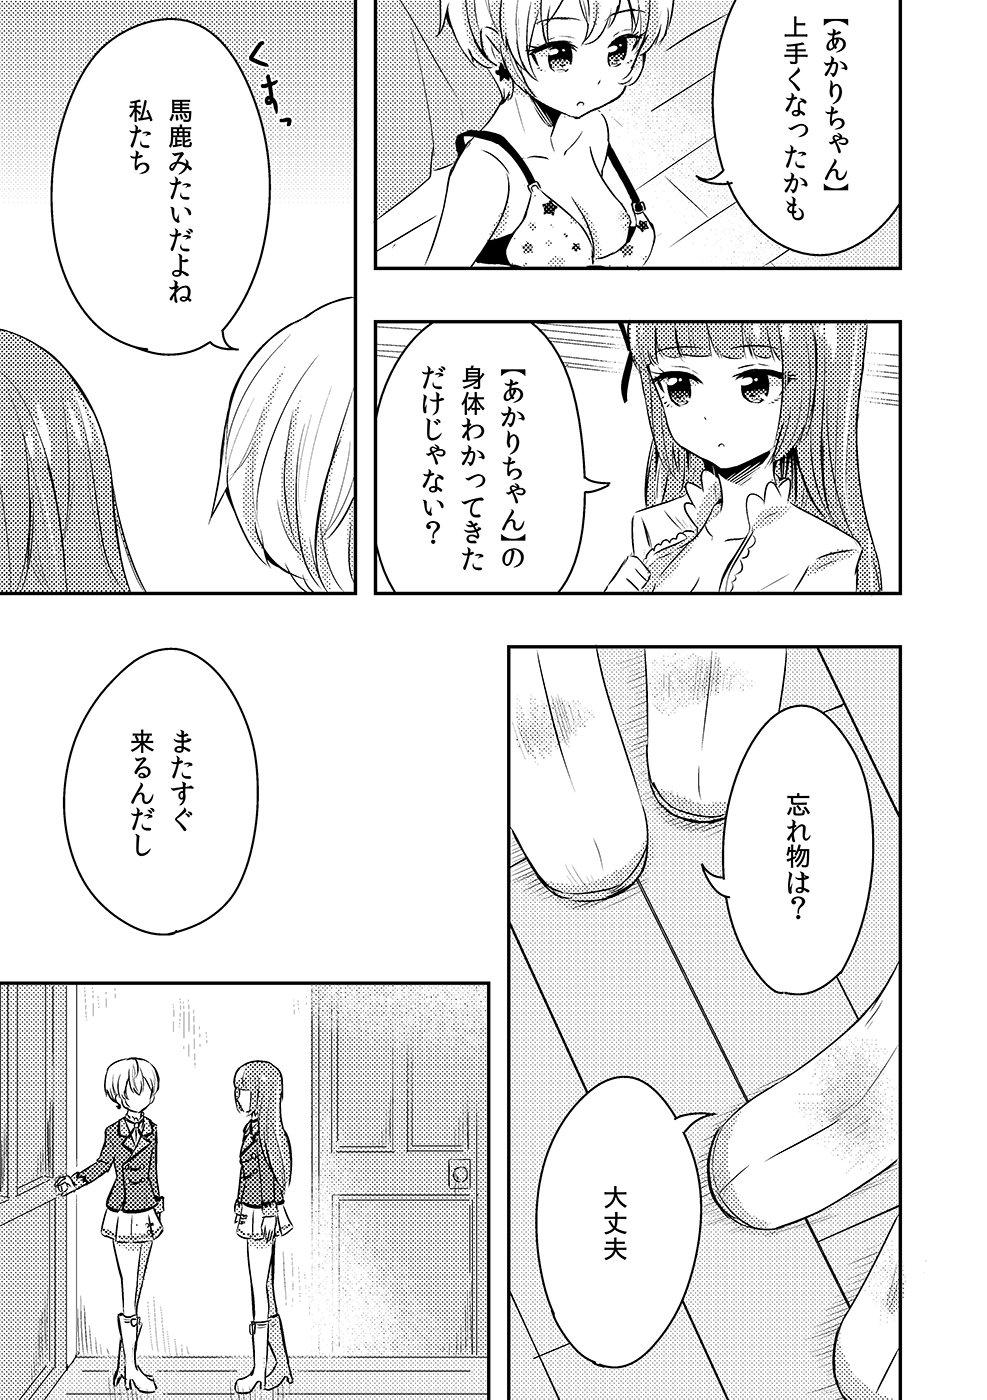 Who contributed to loveless sex joint two years ago! Yuusumi manga. 4